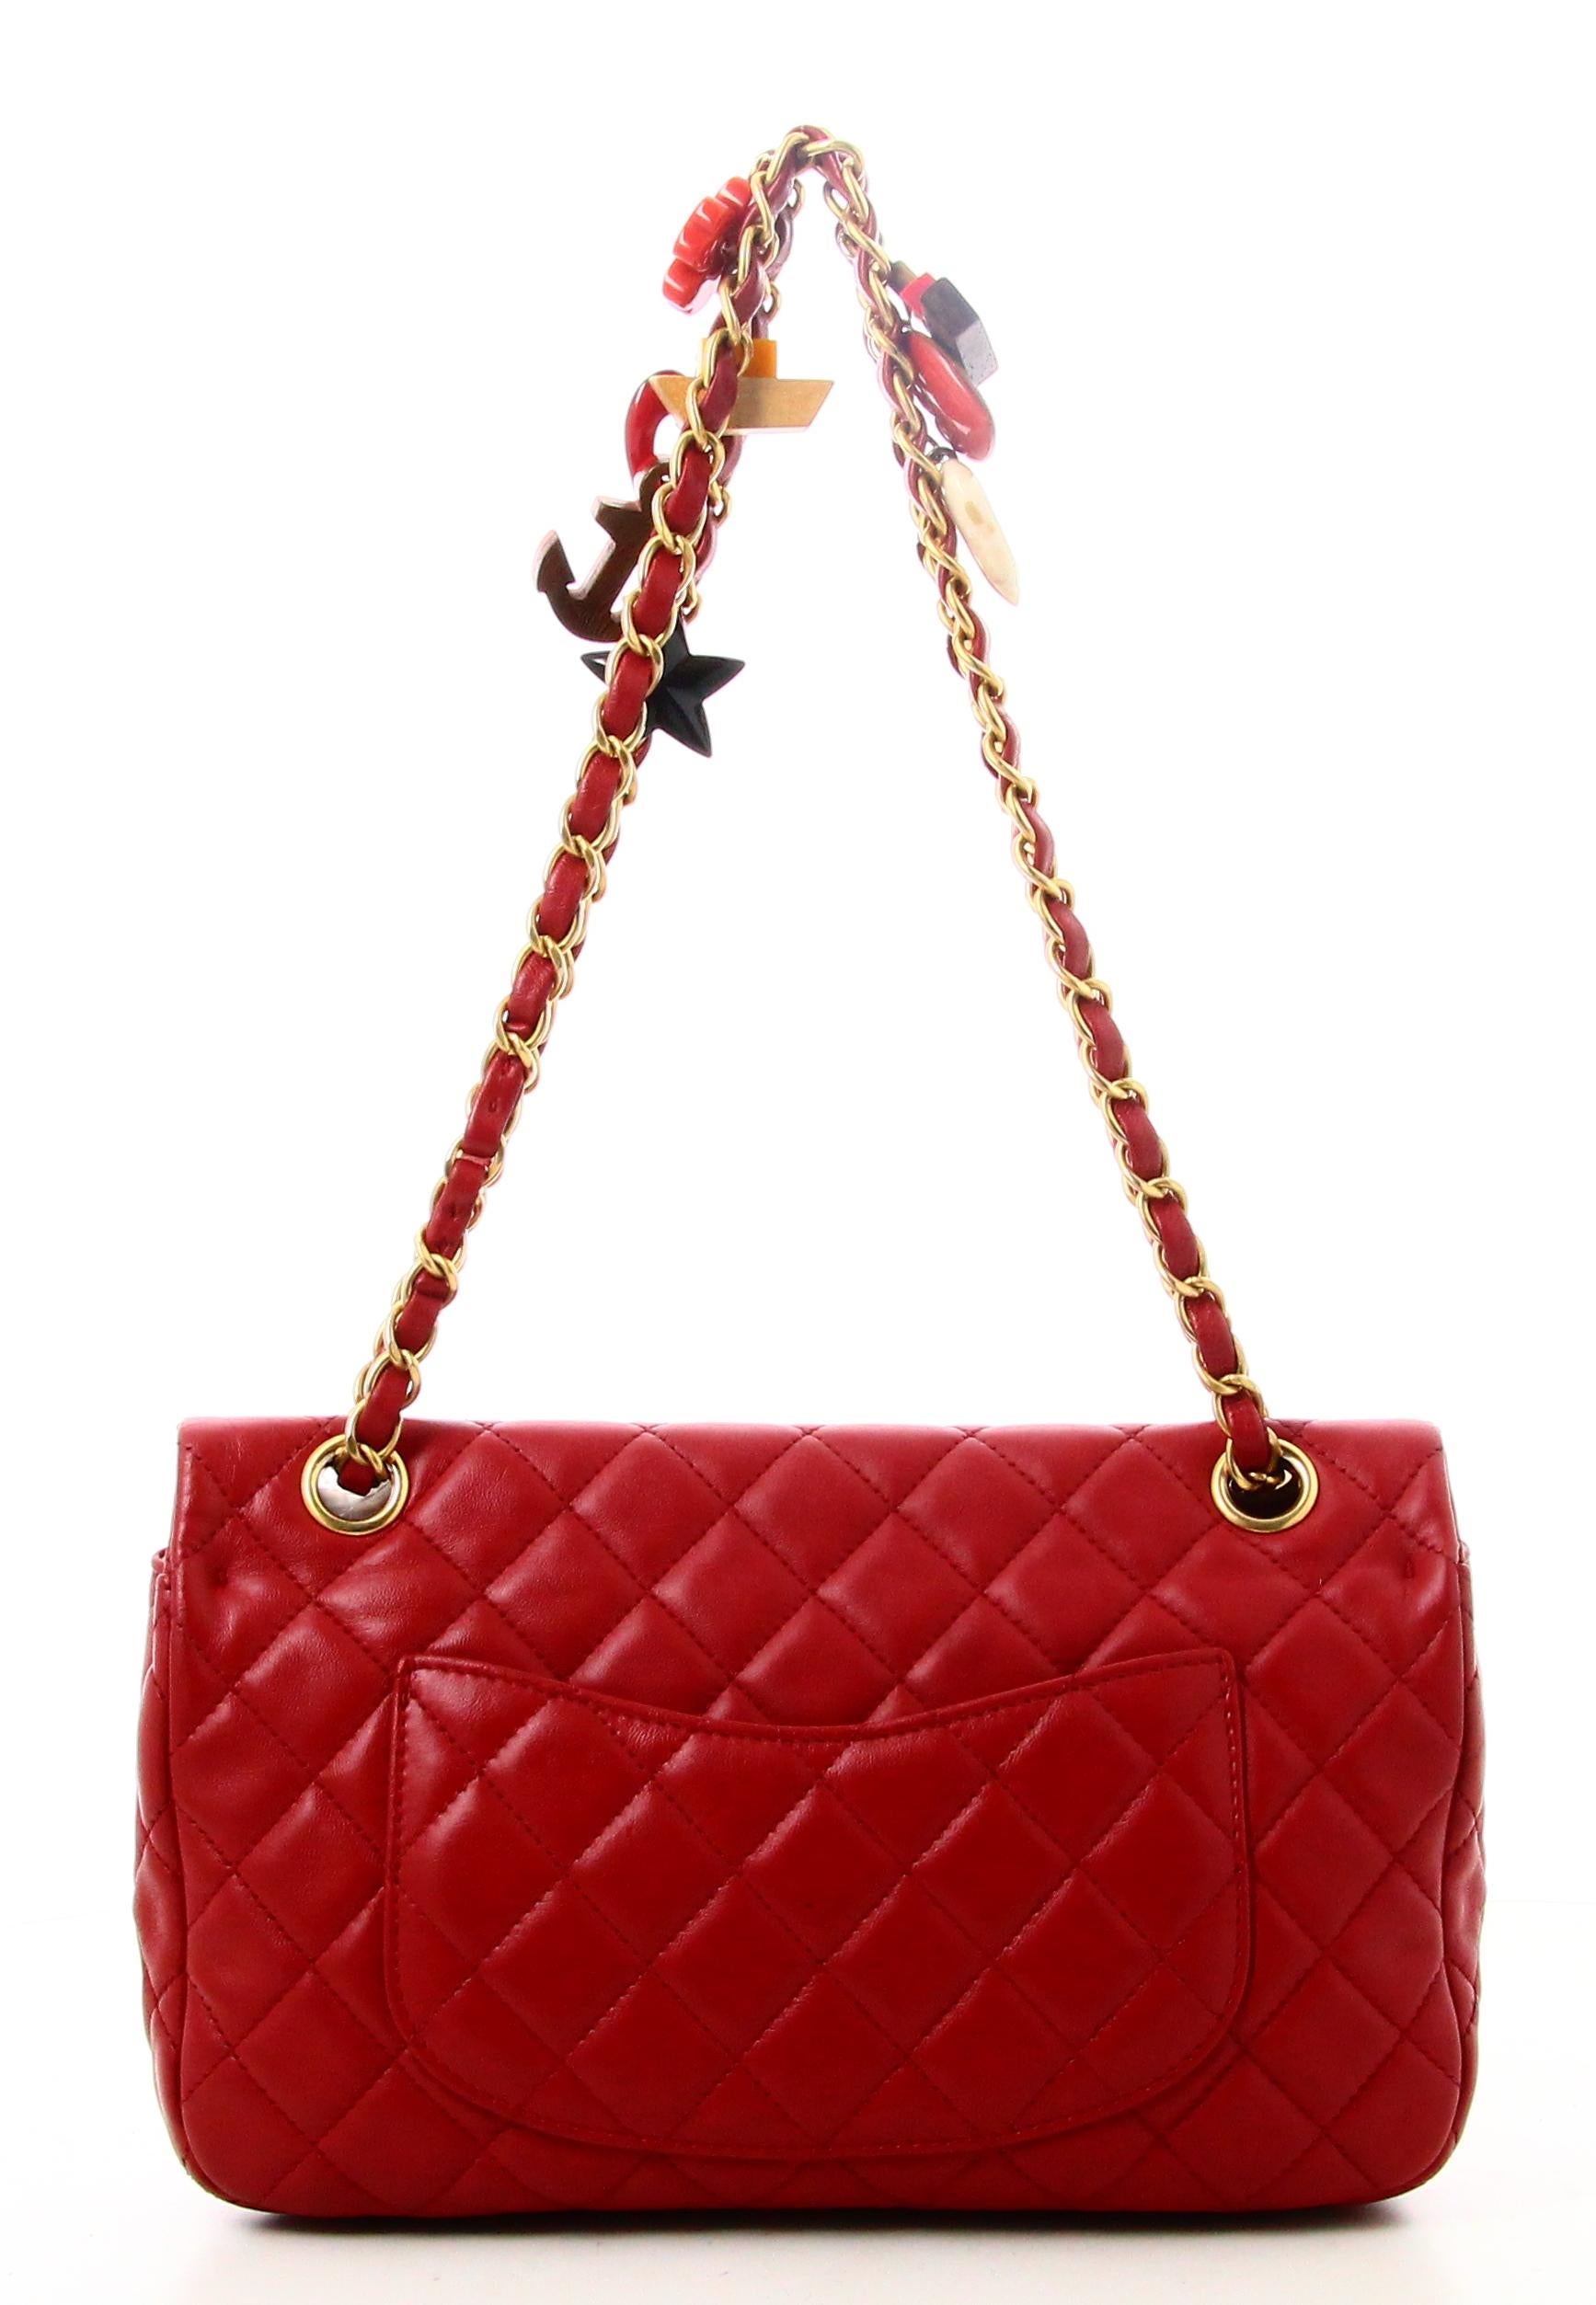 2010 Chanel Timeless Handbag Red Quilted Leather For Sale 1